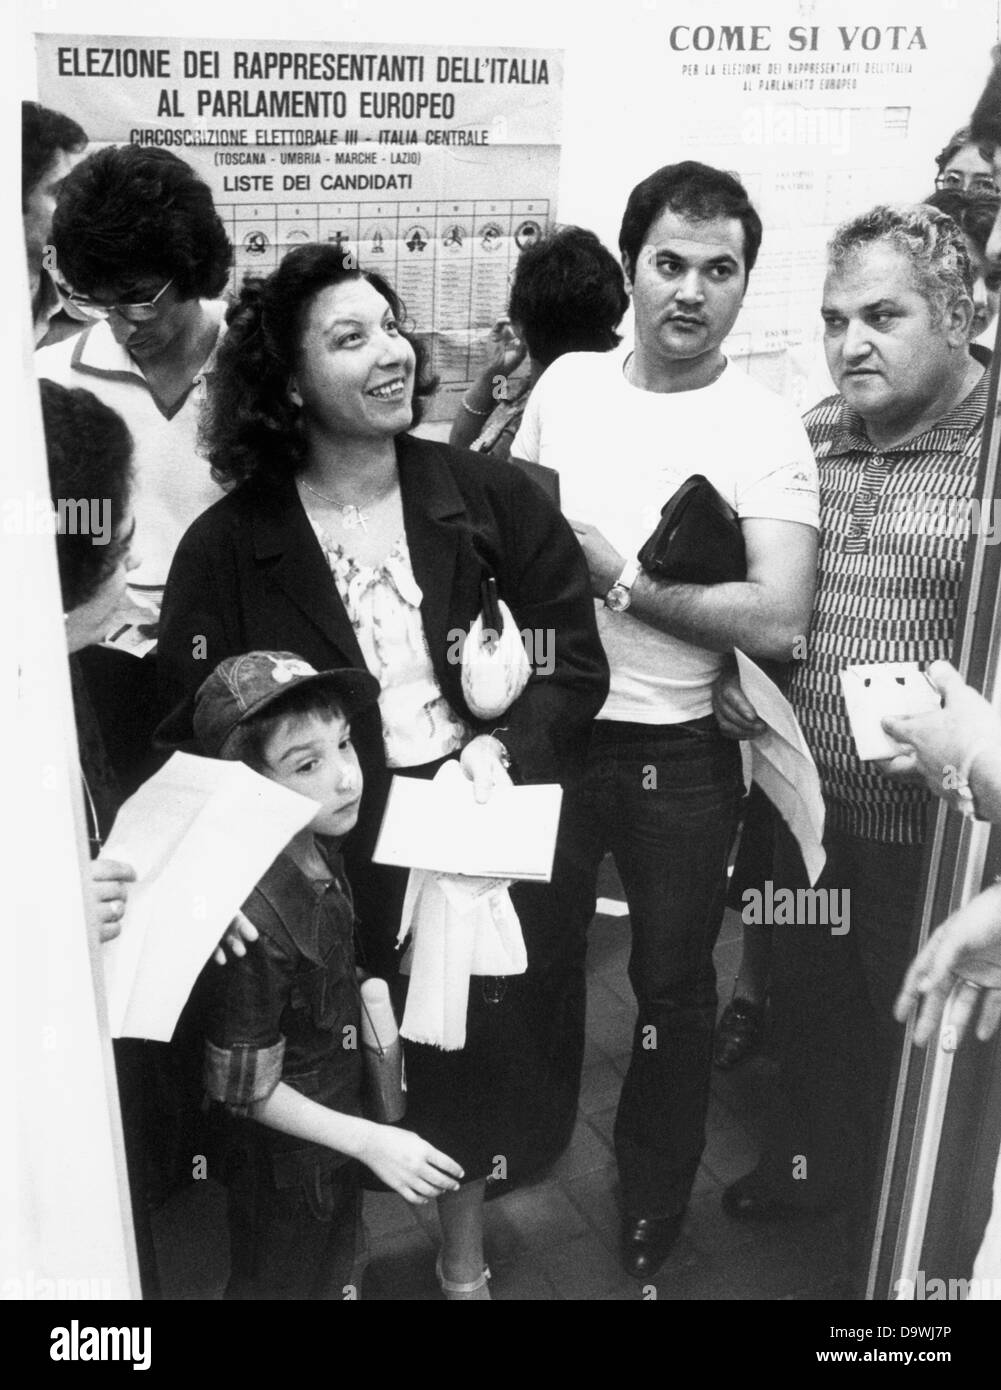 Italian guest workers cast their vote on the occasion of the elections in the European Union in a polling station in Frankfurt am Main on the 9th of June in 1979. Stock Photo